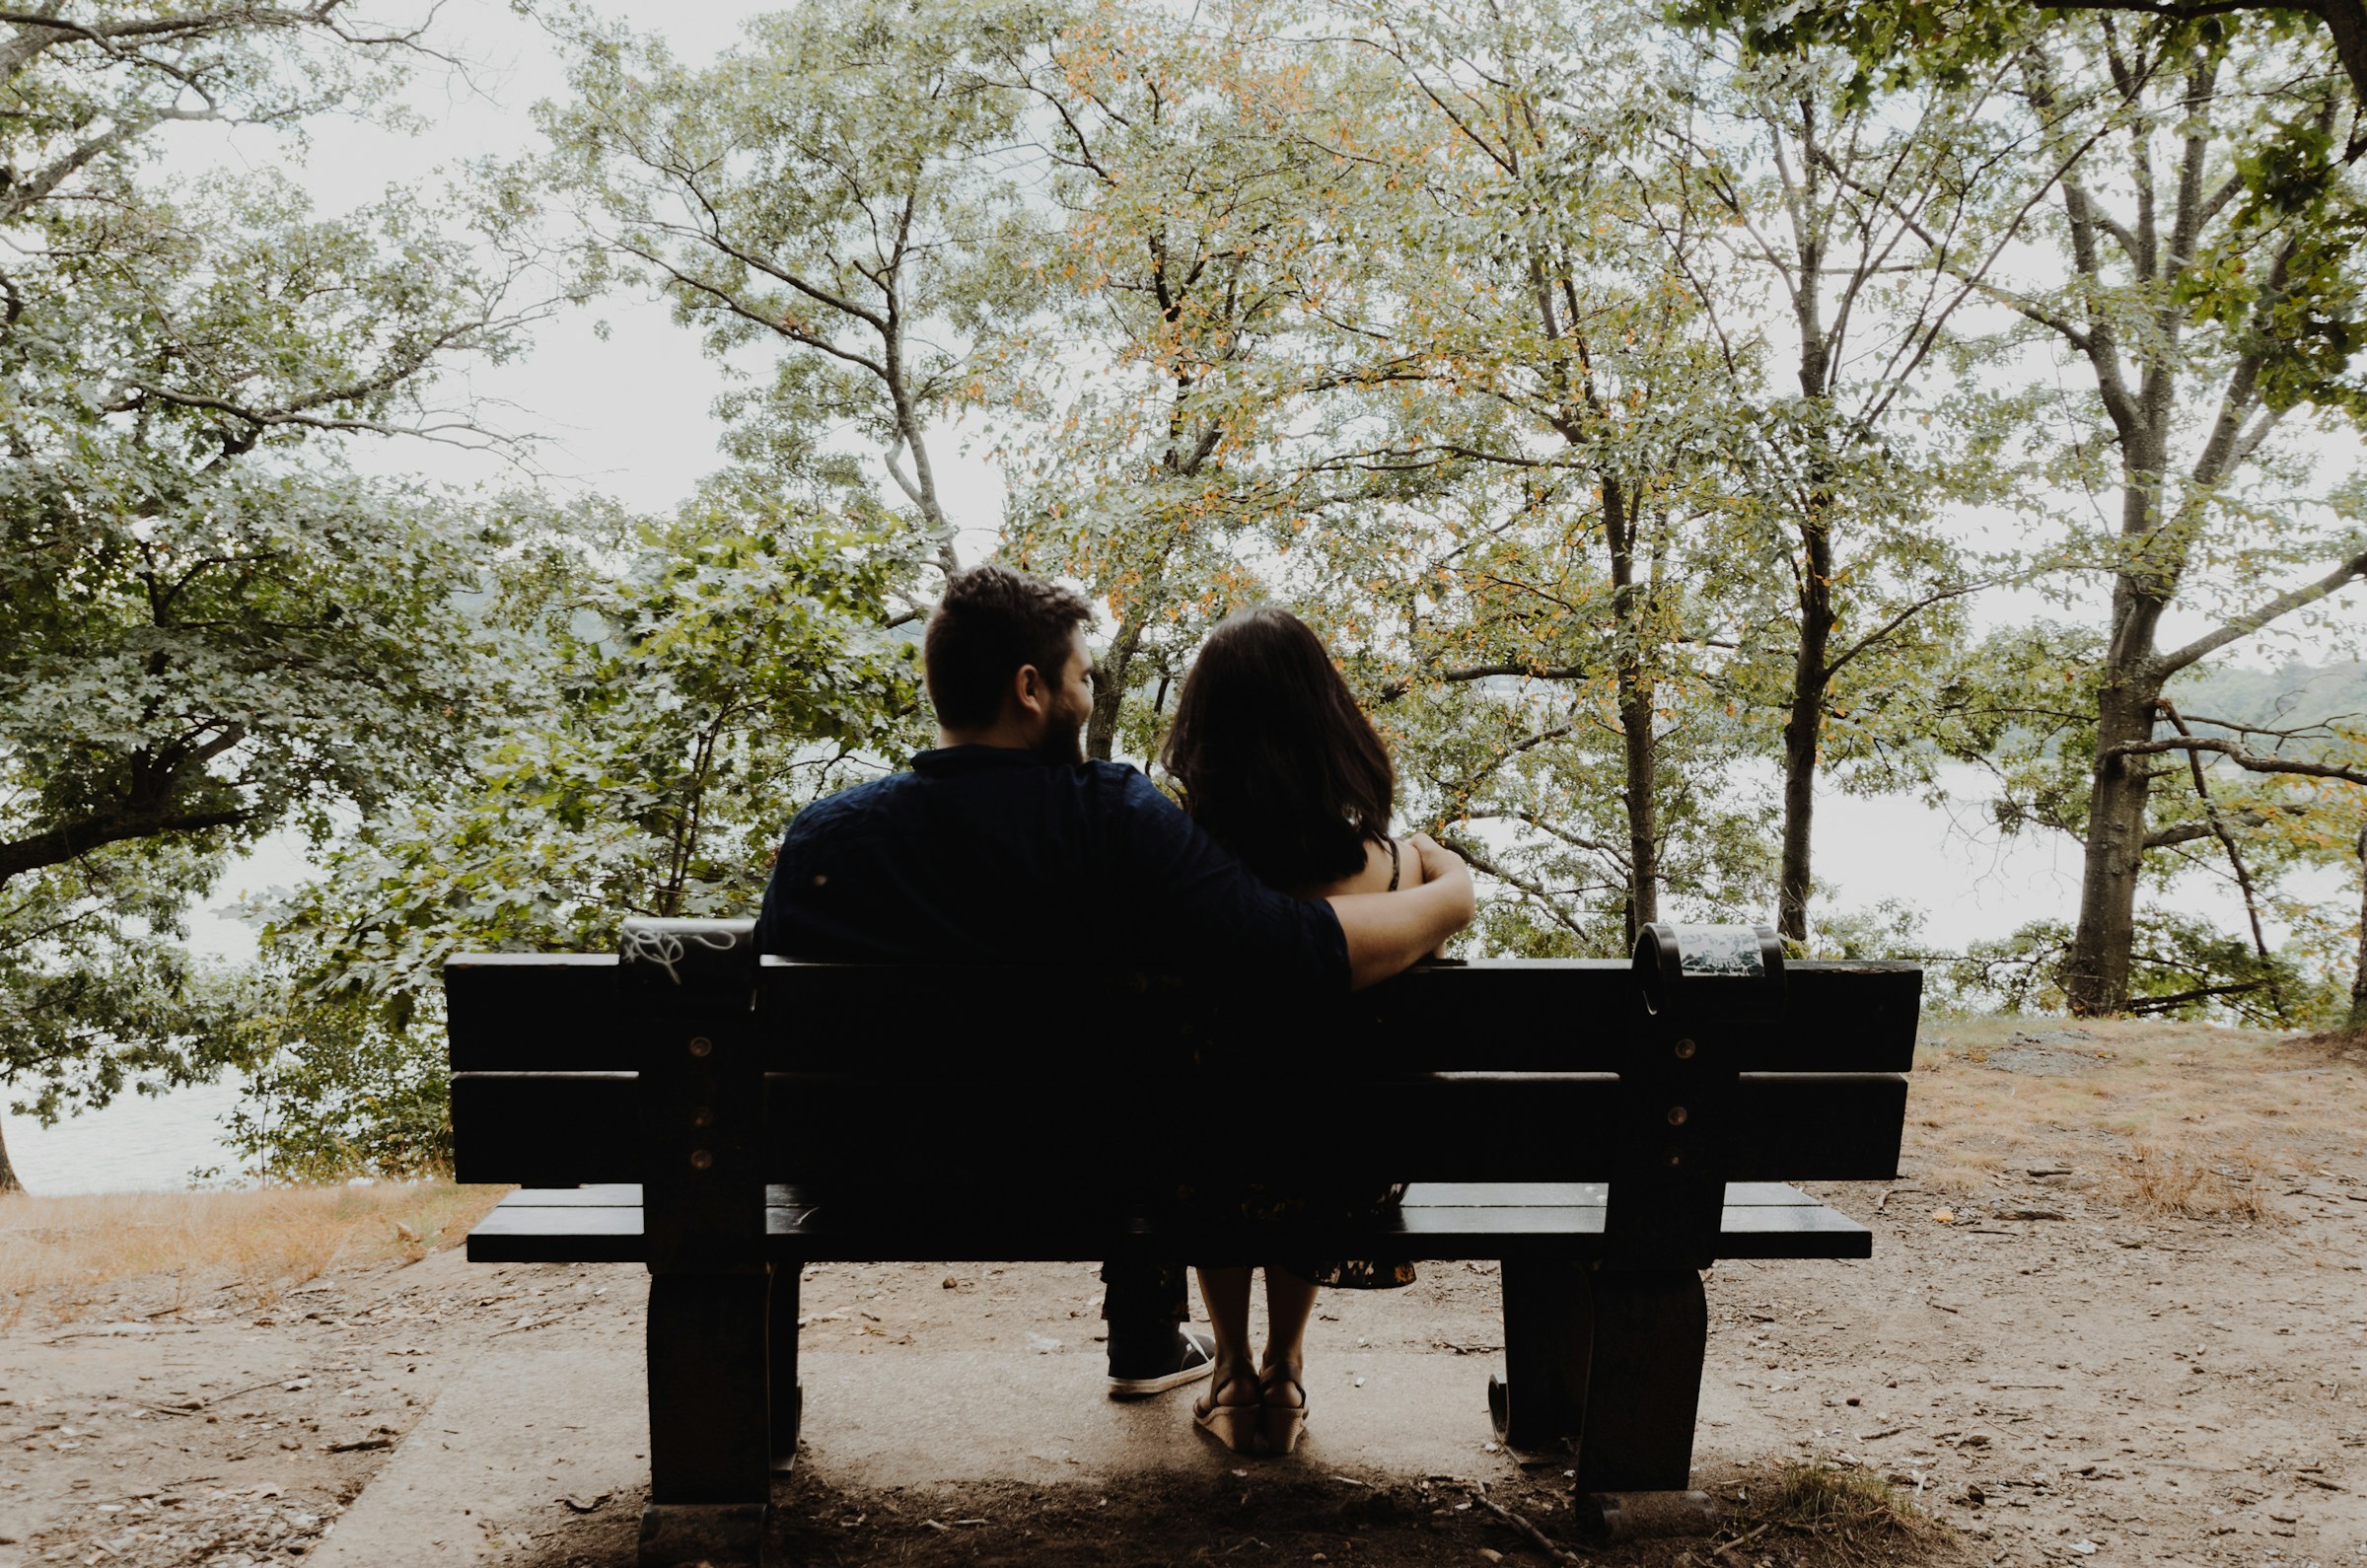 A couple sitting on a bench together | Source: Unsplash